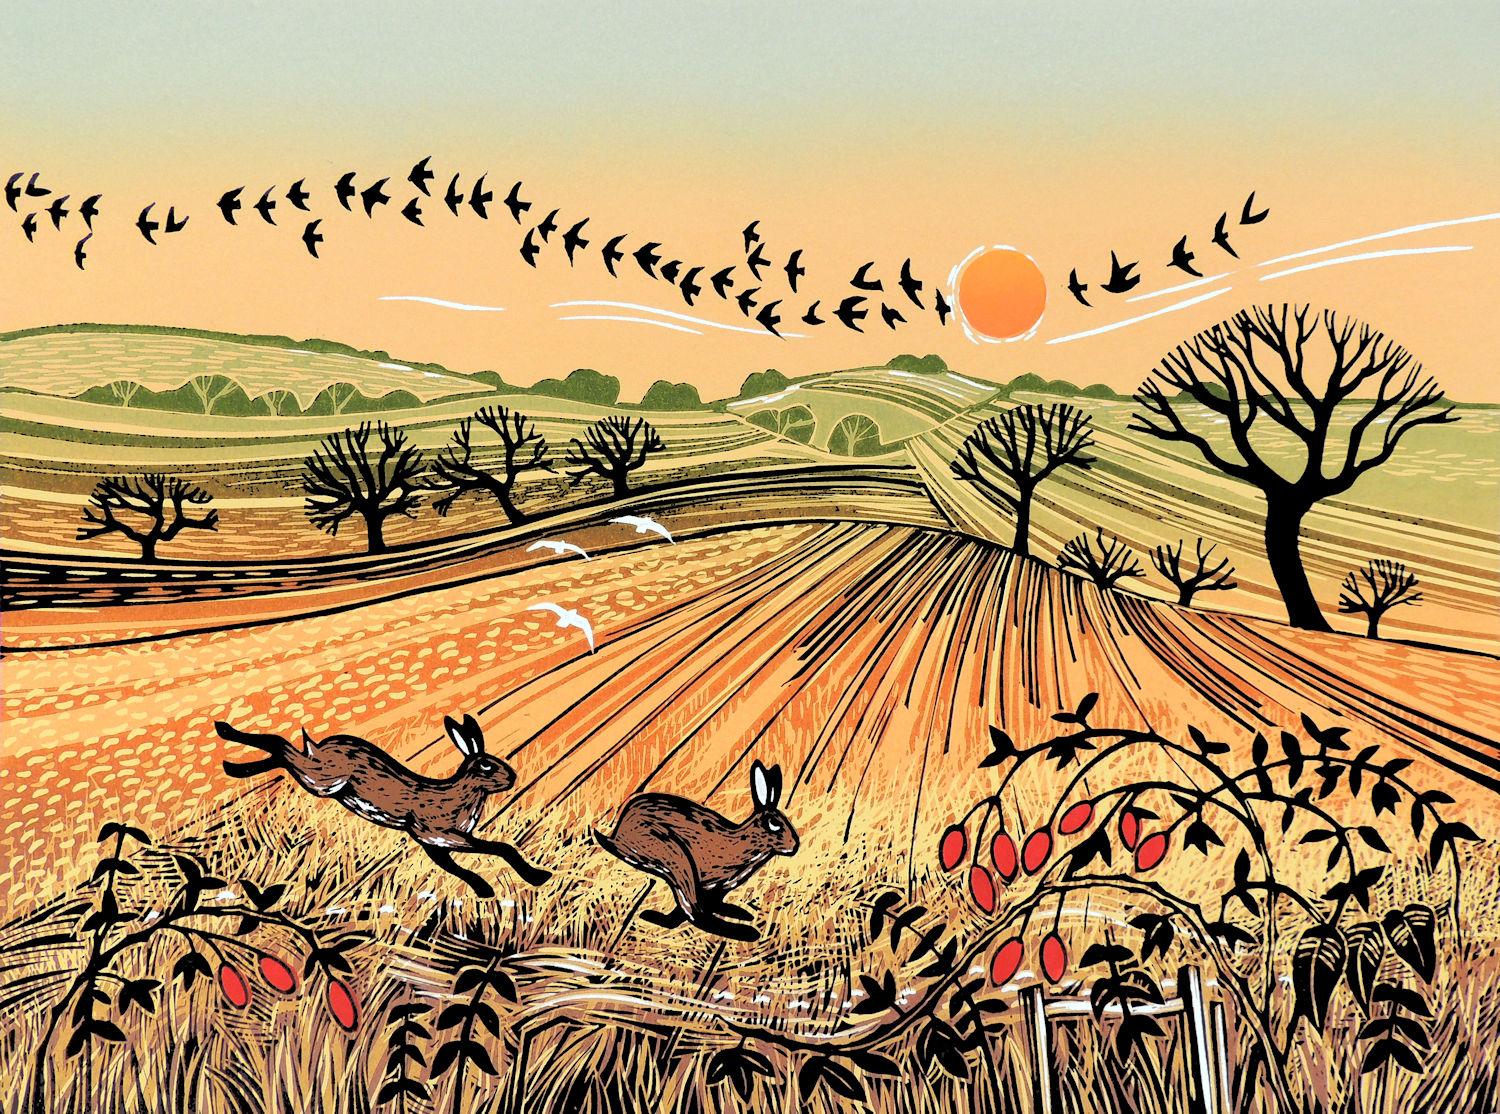 Rob Barnes Landscape Print - Leaping the Field, Linocut Print, Hares, Rural nature, countryside art